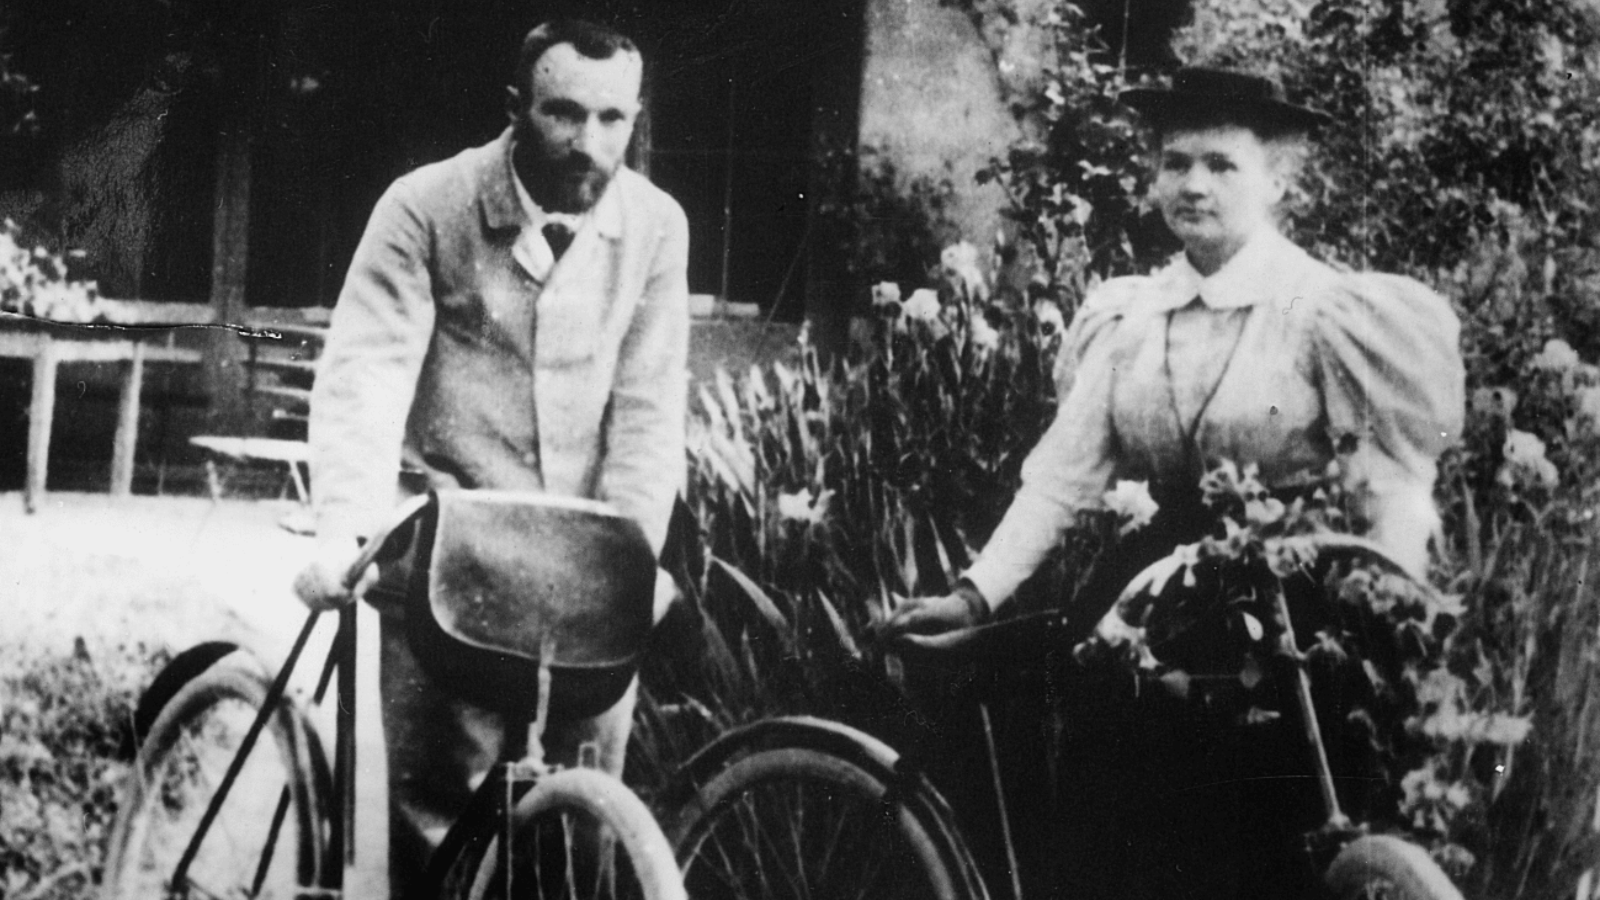 The famous scientist couple, Marie and Pierre Curie with their bicycles on their honeymoon in 1895